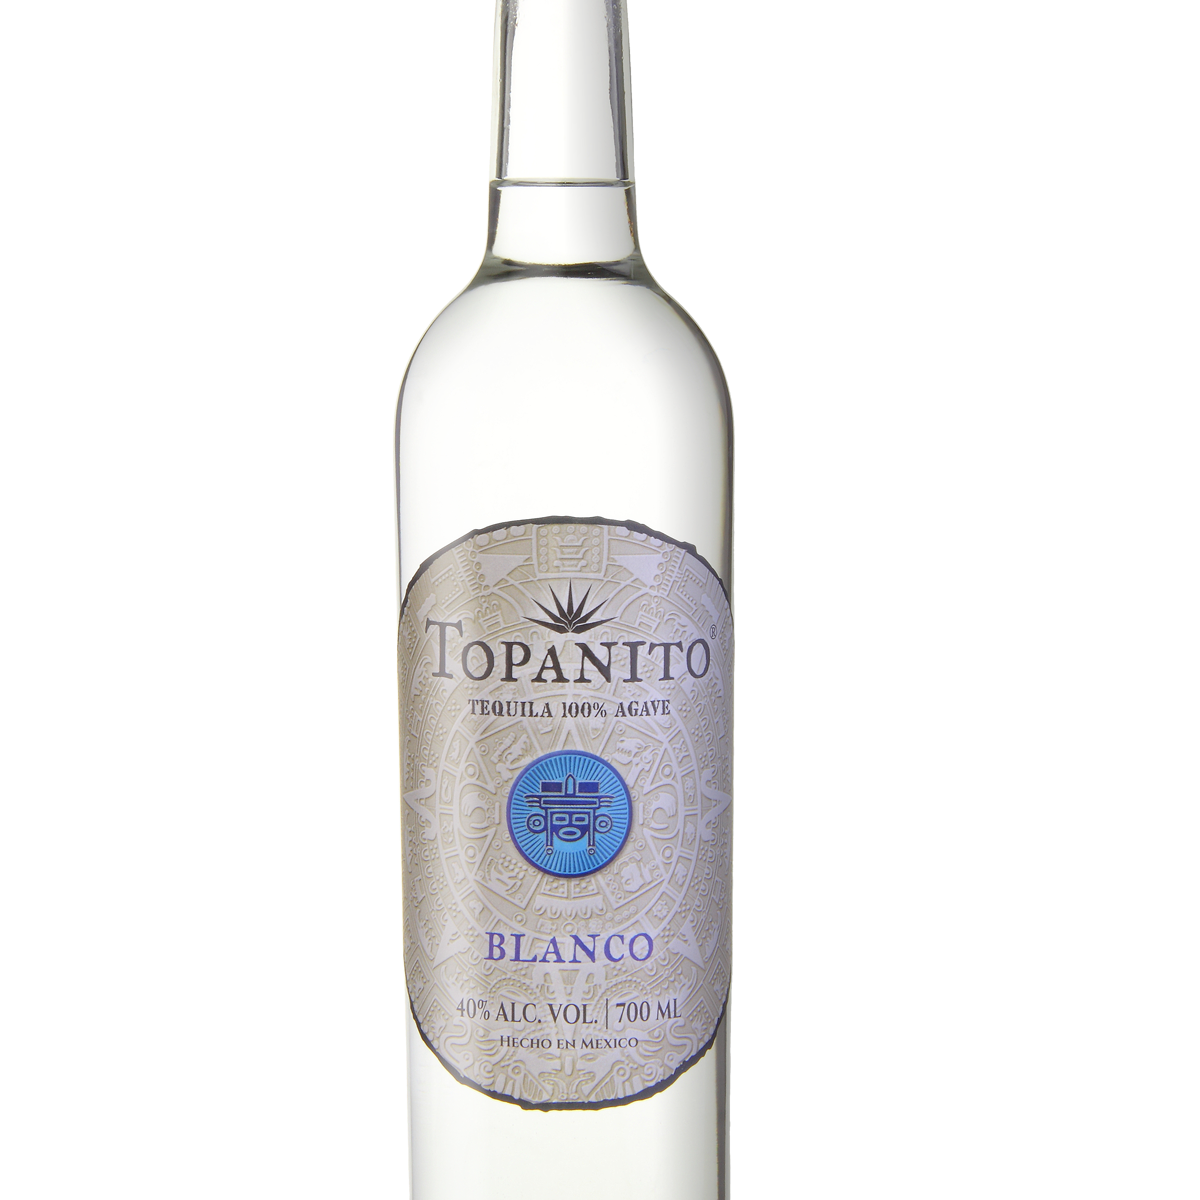 TOPANITO Blanco Tequila 100% Agave